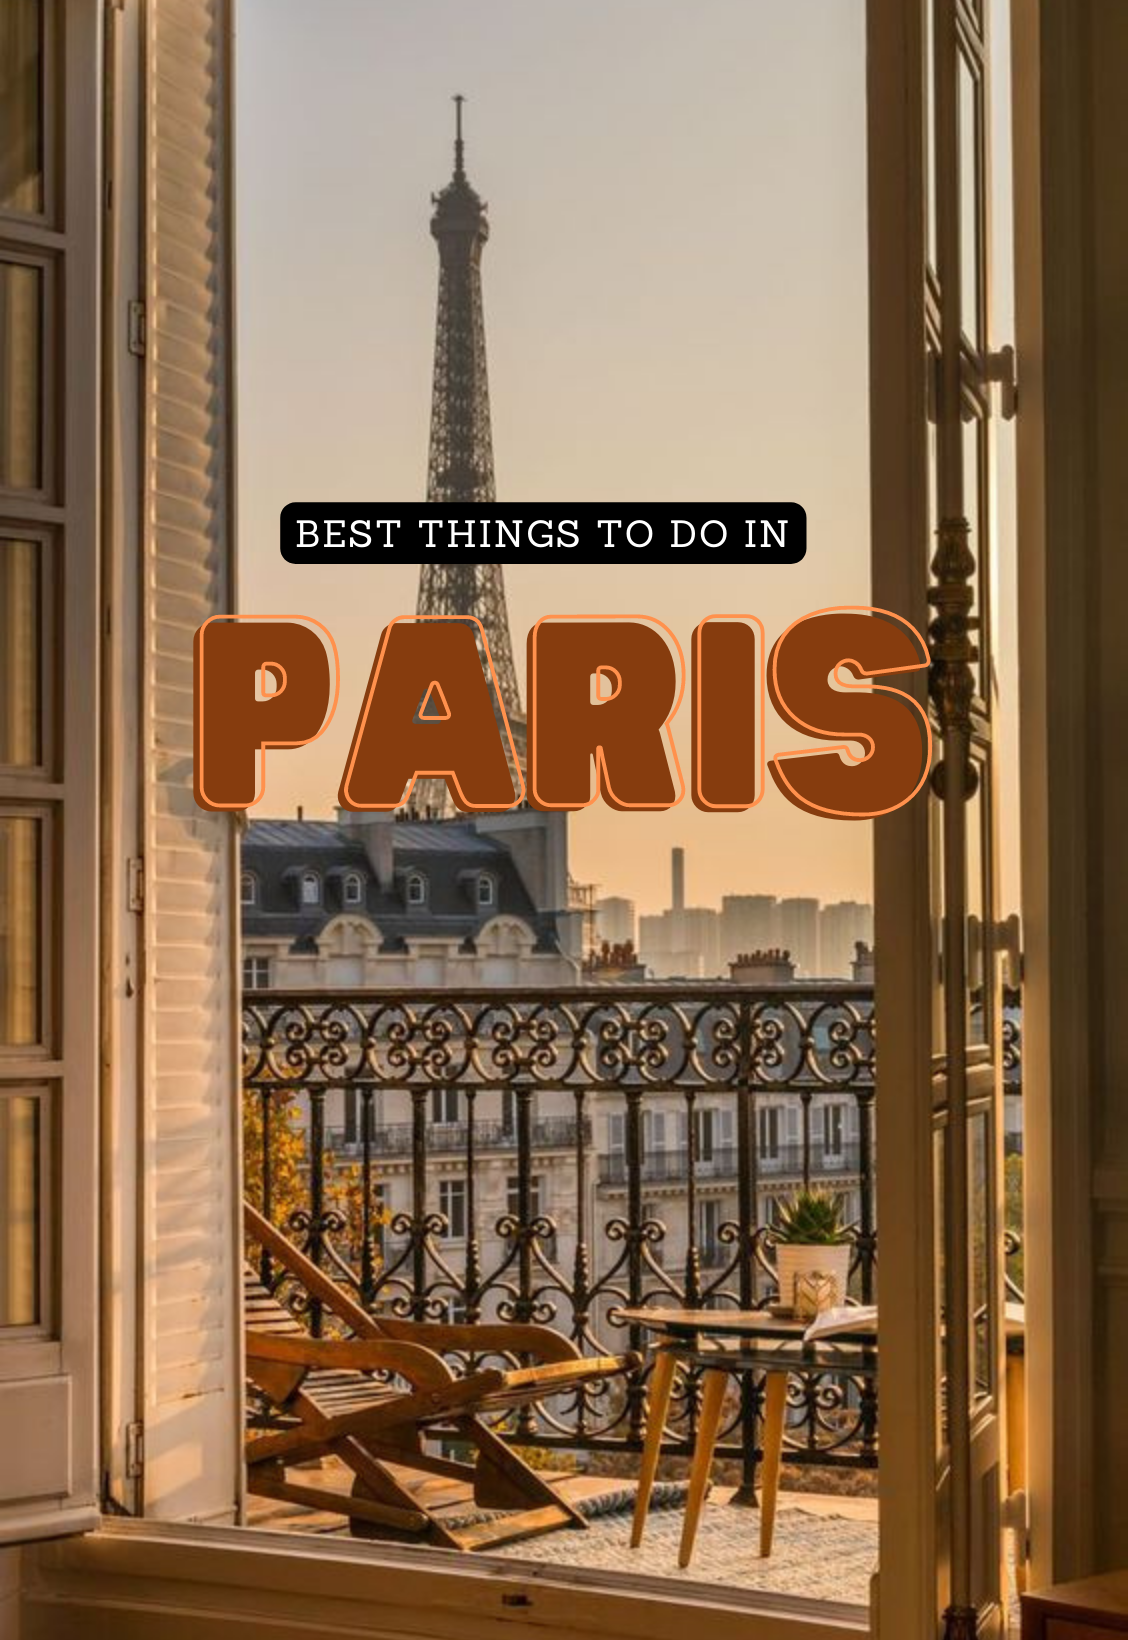 Best things to do in Paris, France